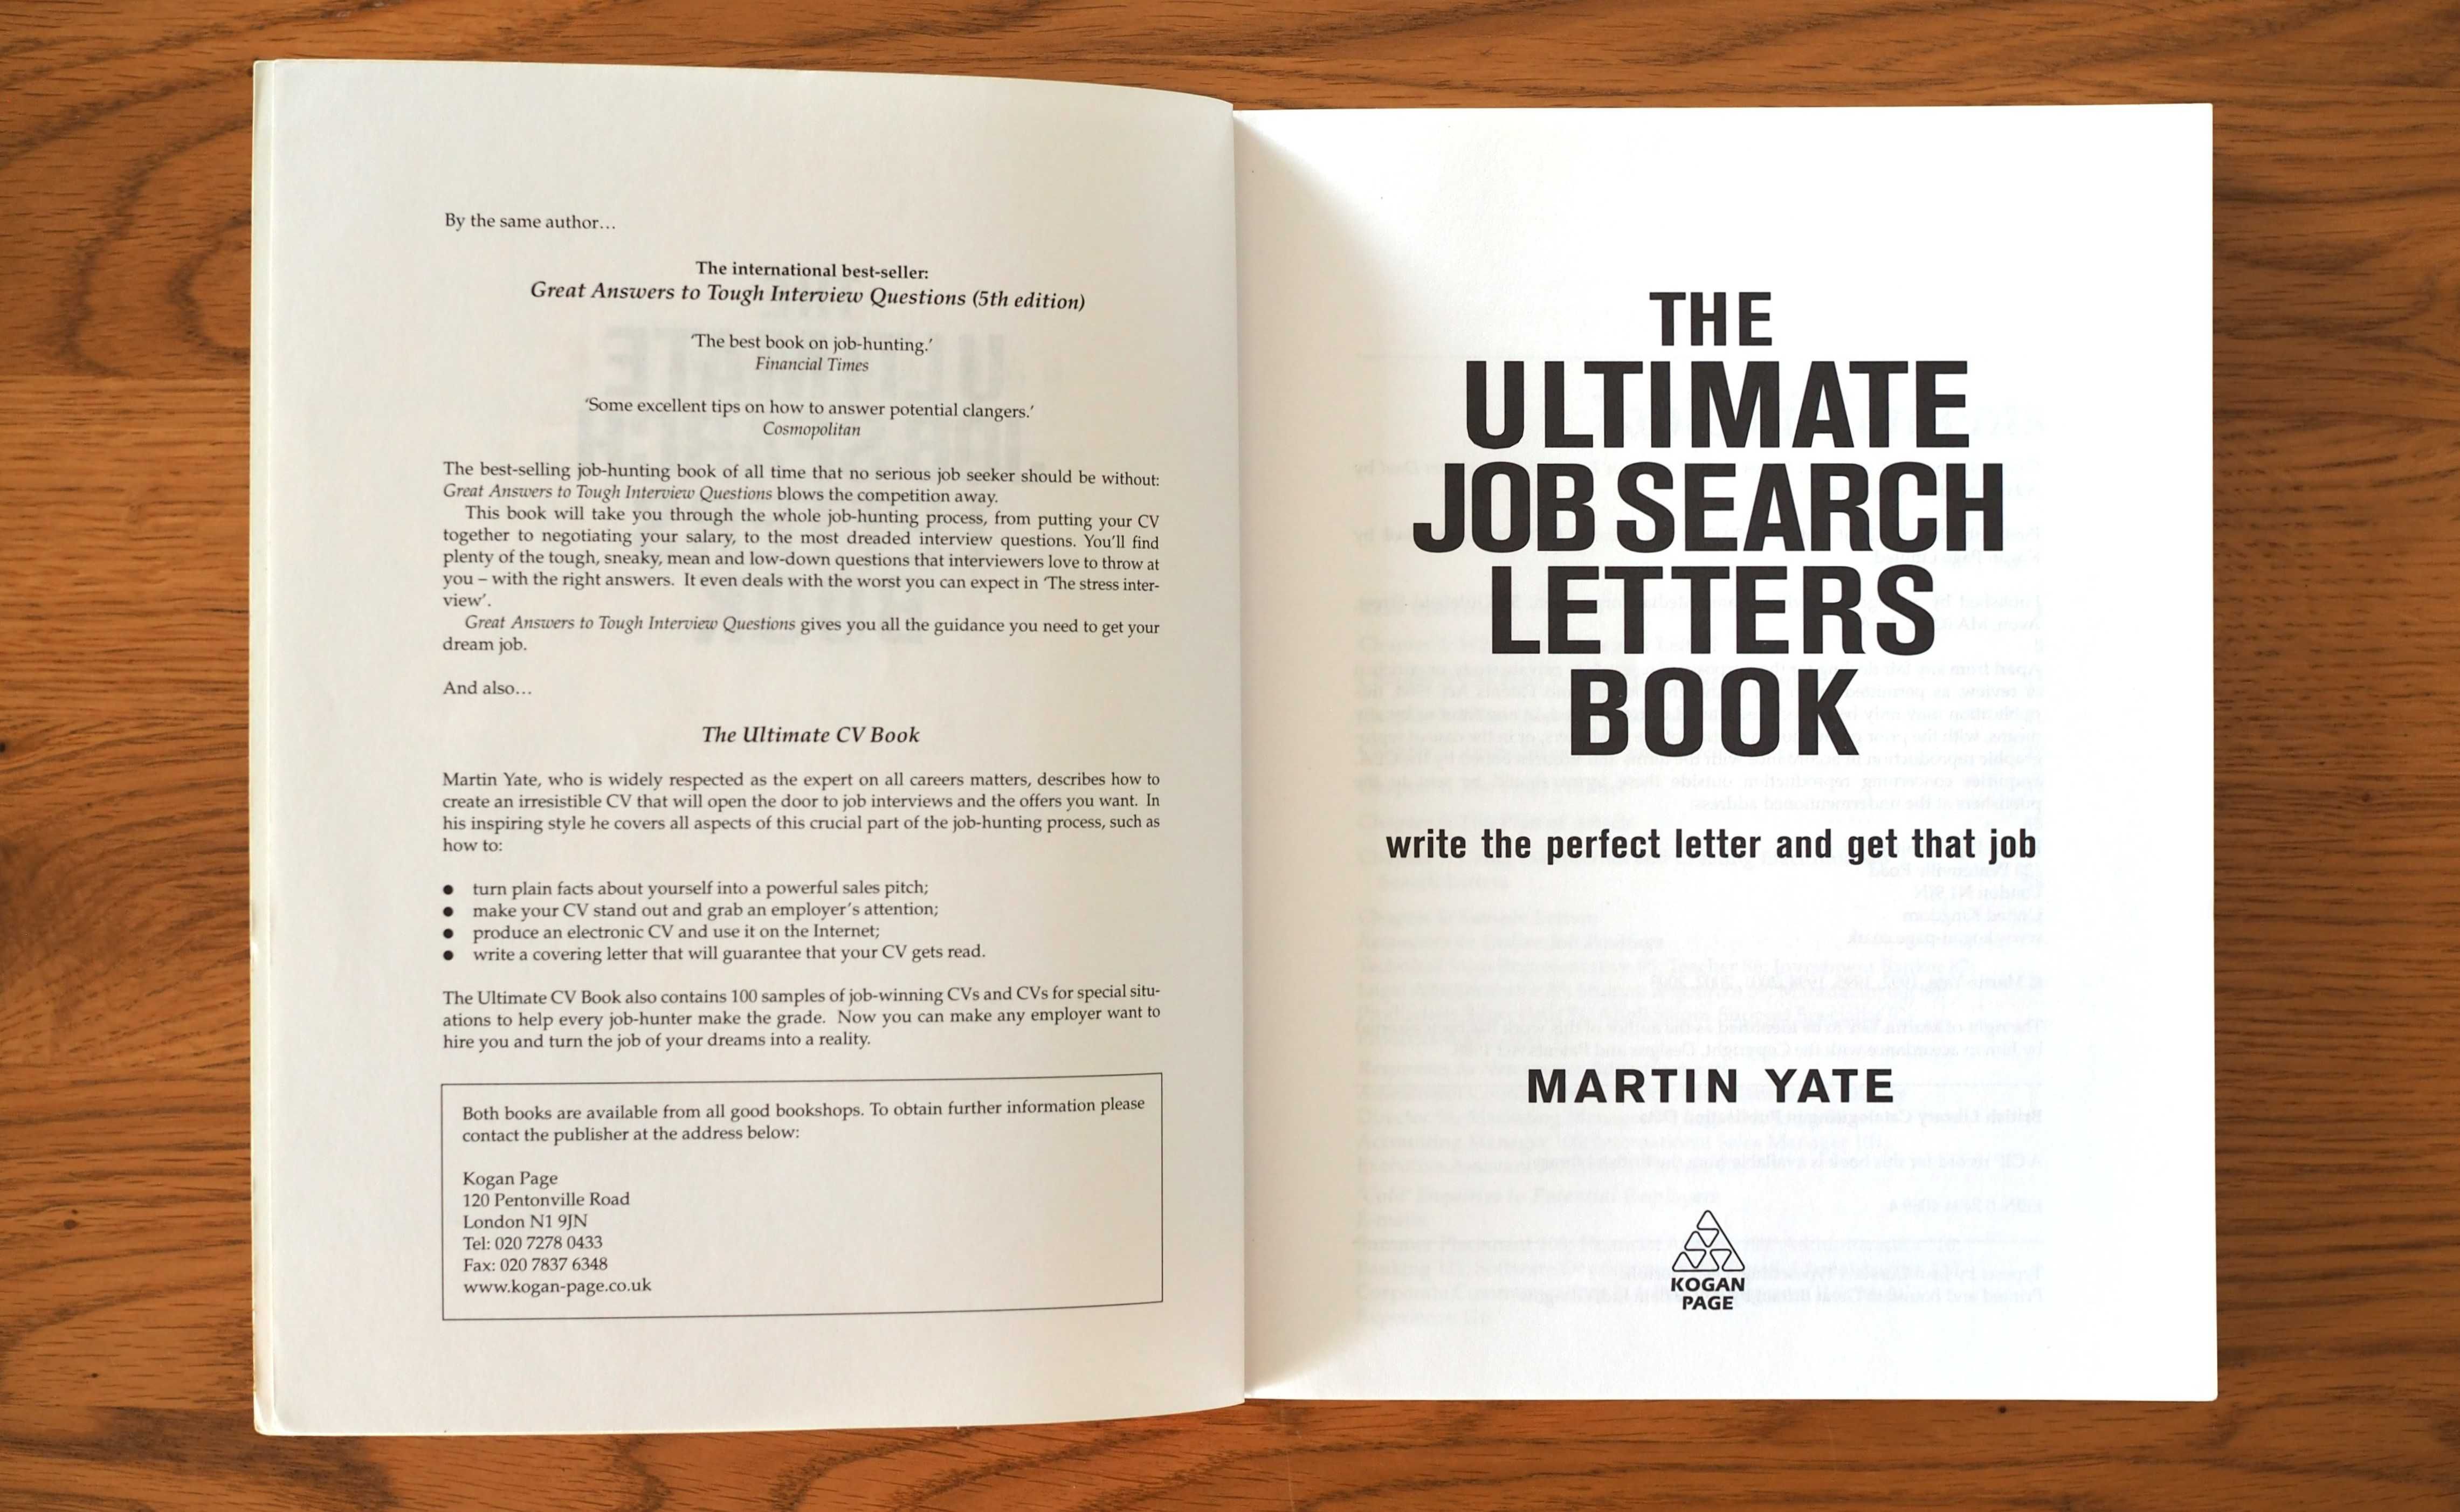 Martin Yate The Ultimate Job Search Letters Book